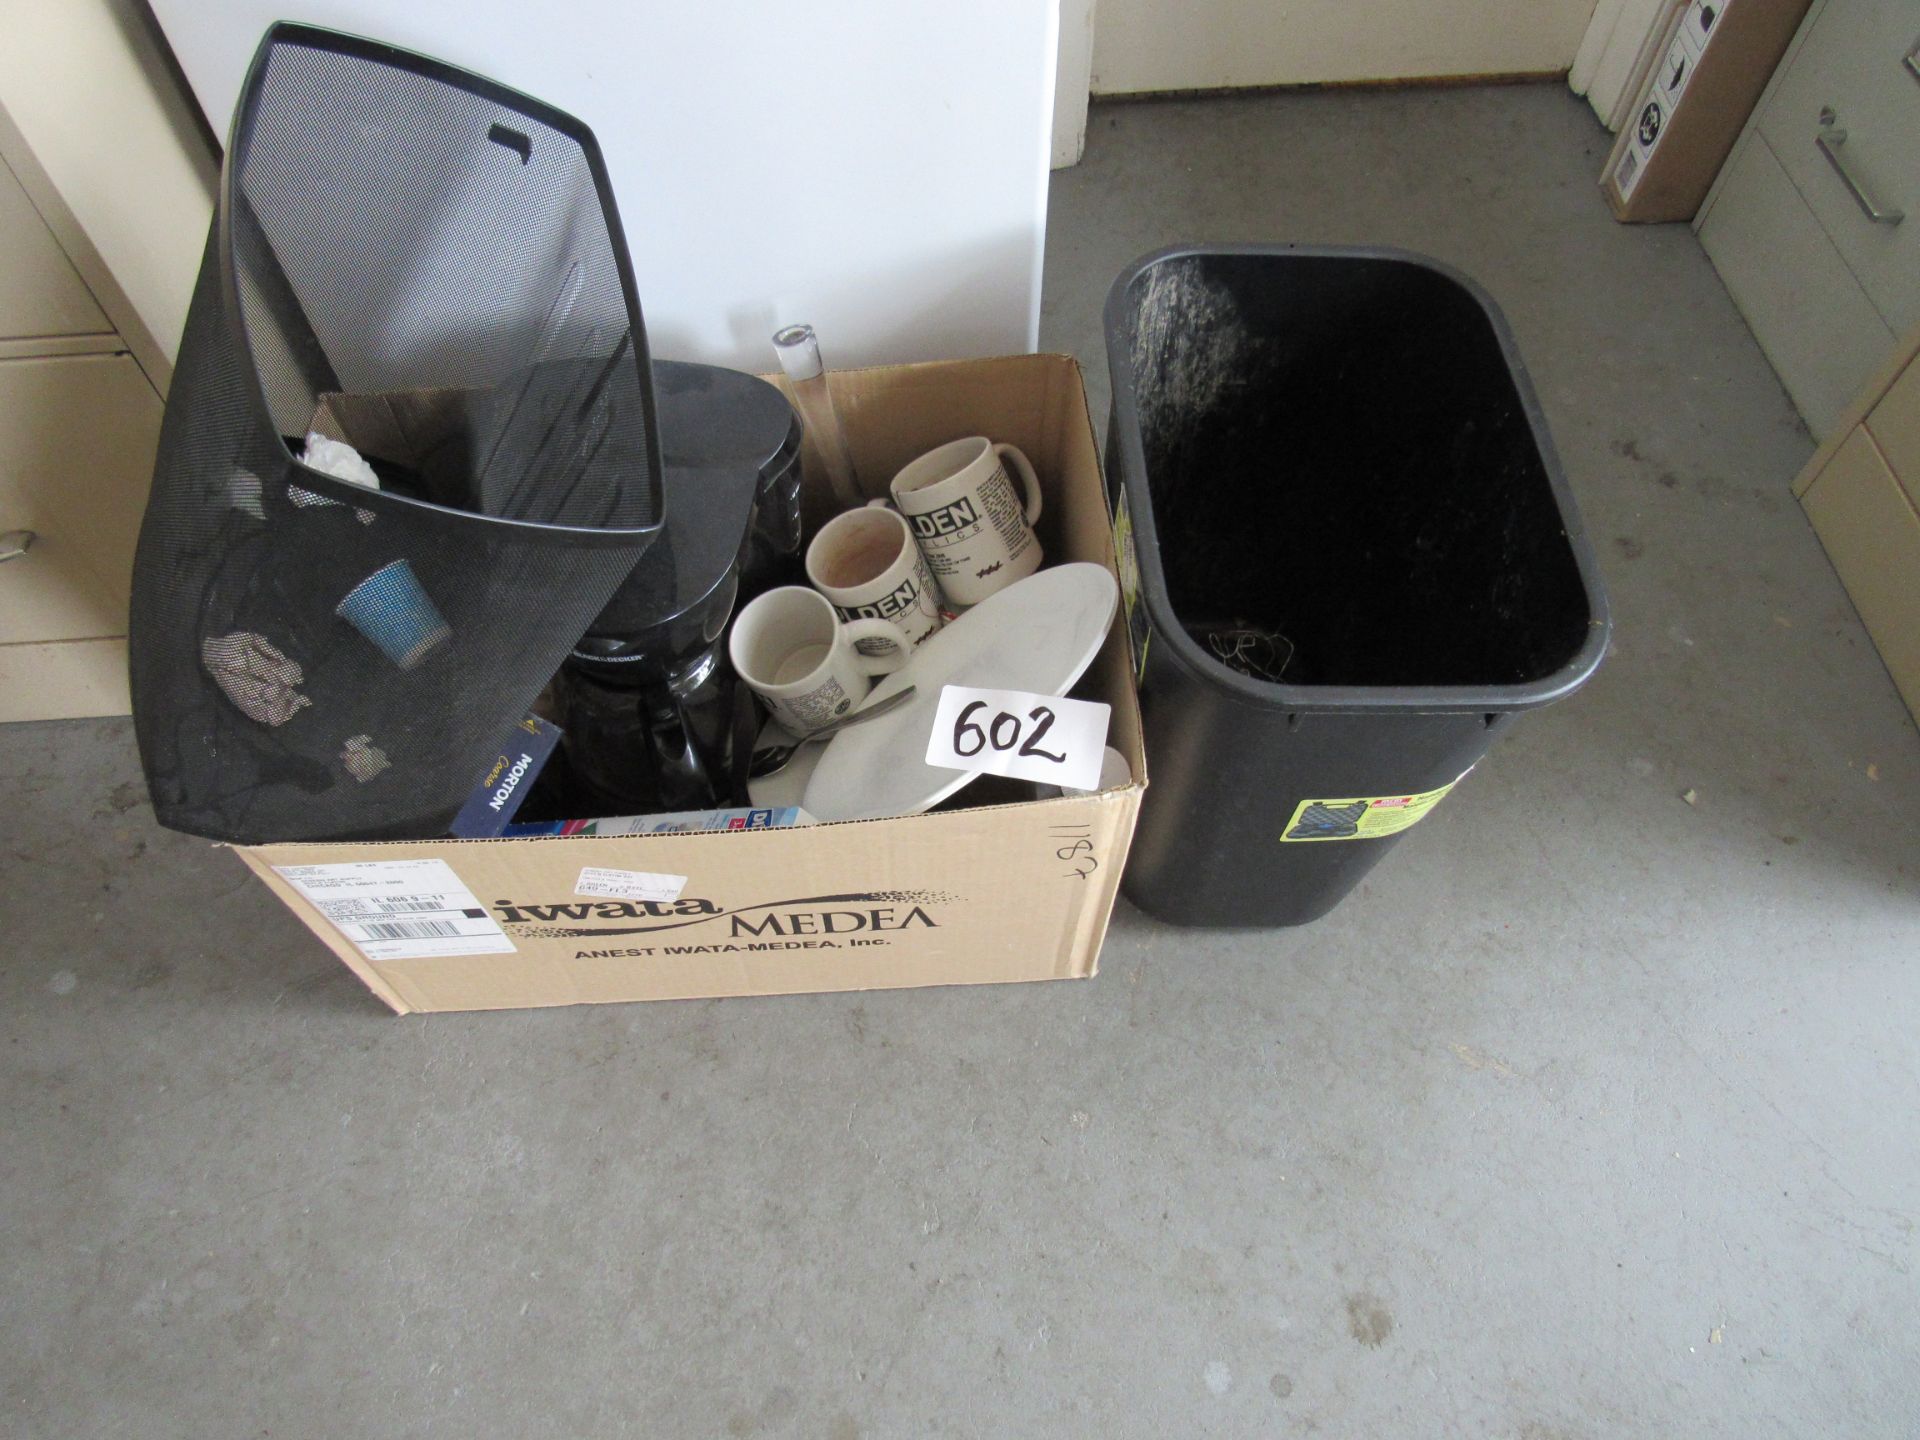 Grp of kitchen items and waste baskets